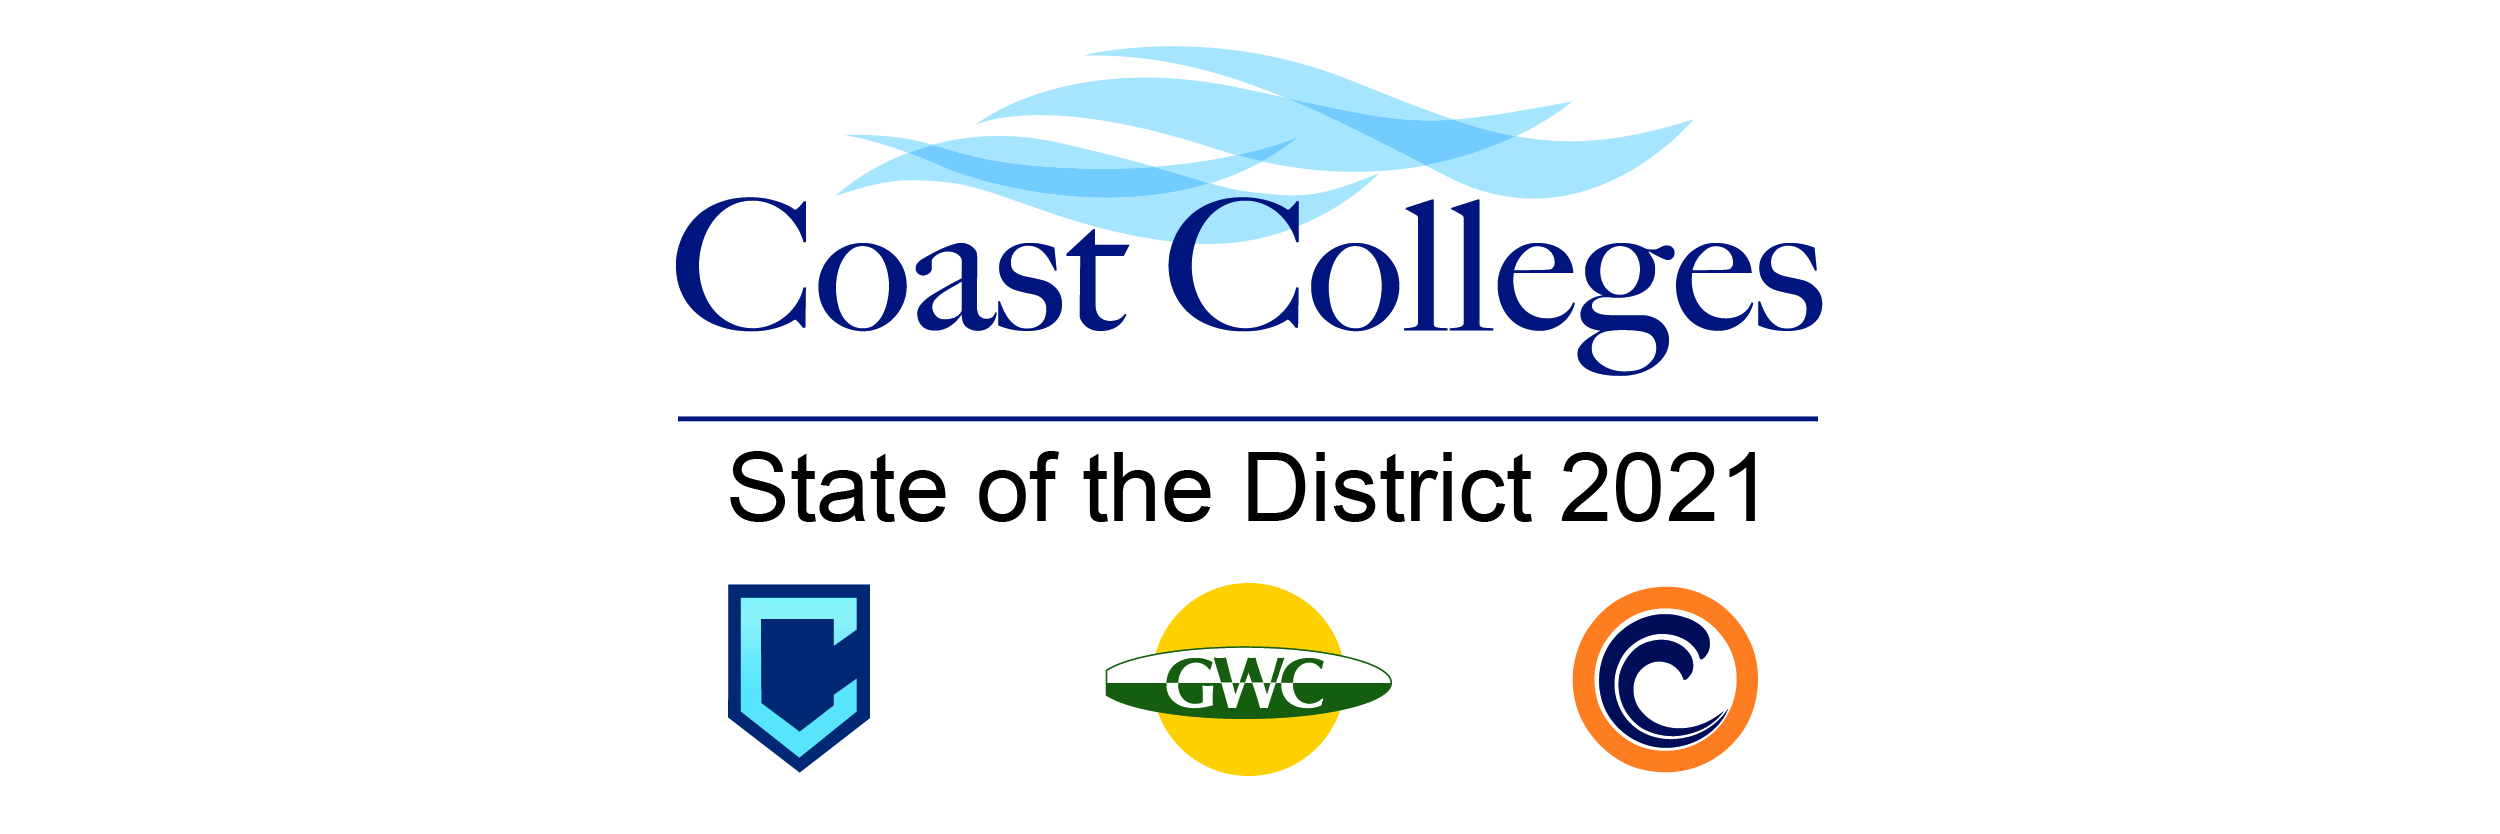 Coast Colleges logo with the words State of the District 2021 underneath followed by the logos for Coastline College, Golden West College, and Orange Coast College